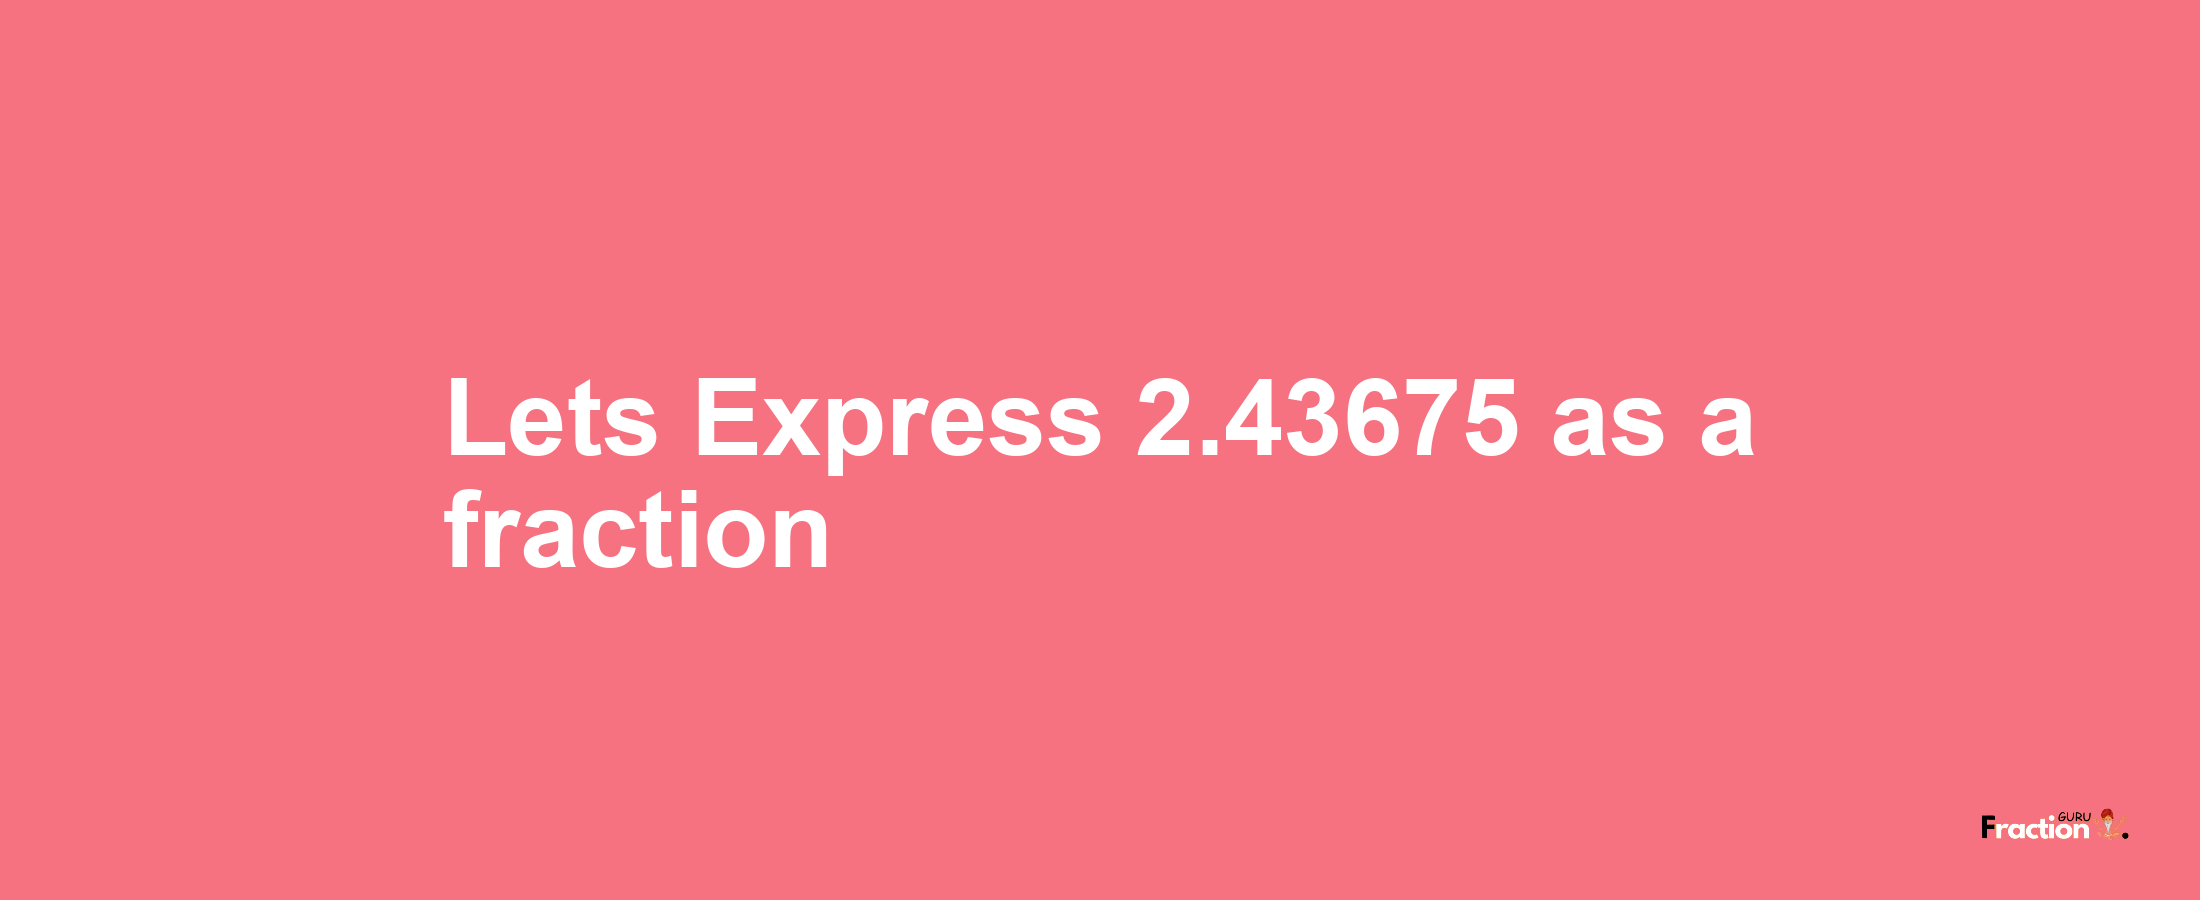 Lets Express 2.43675 as afraction